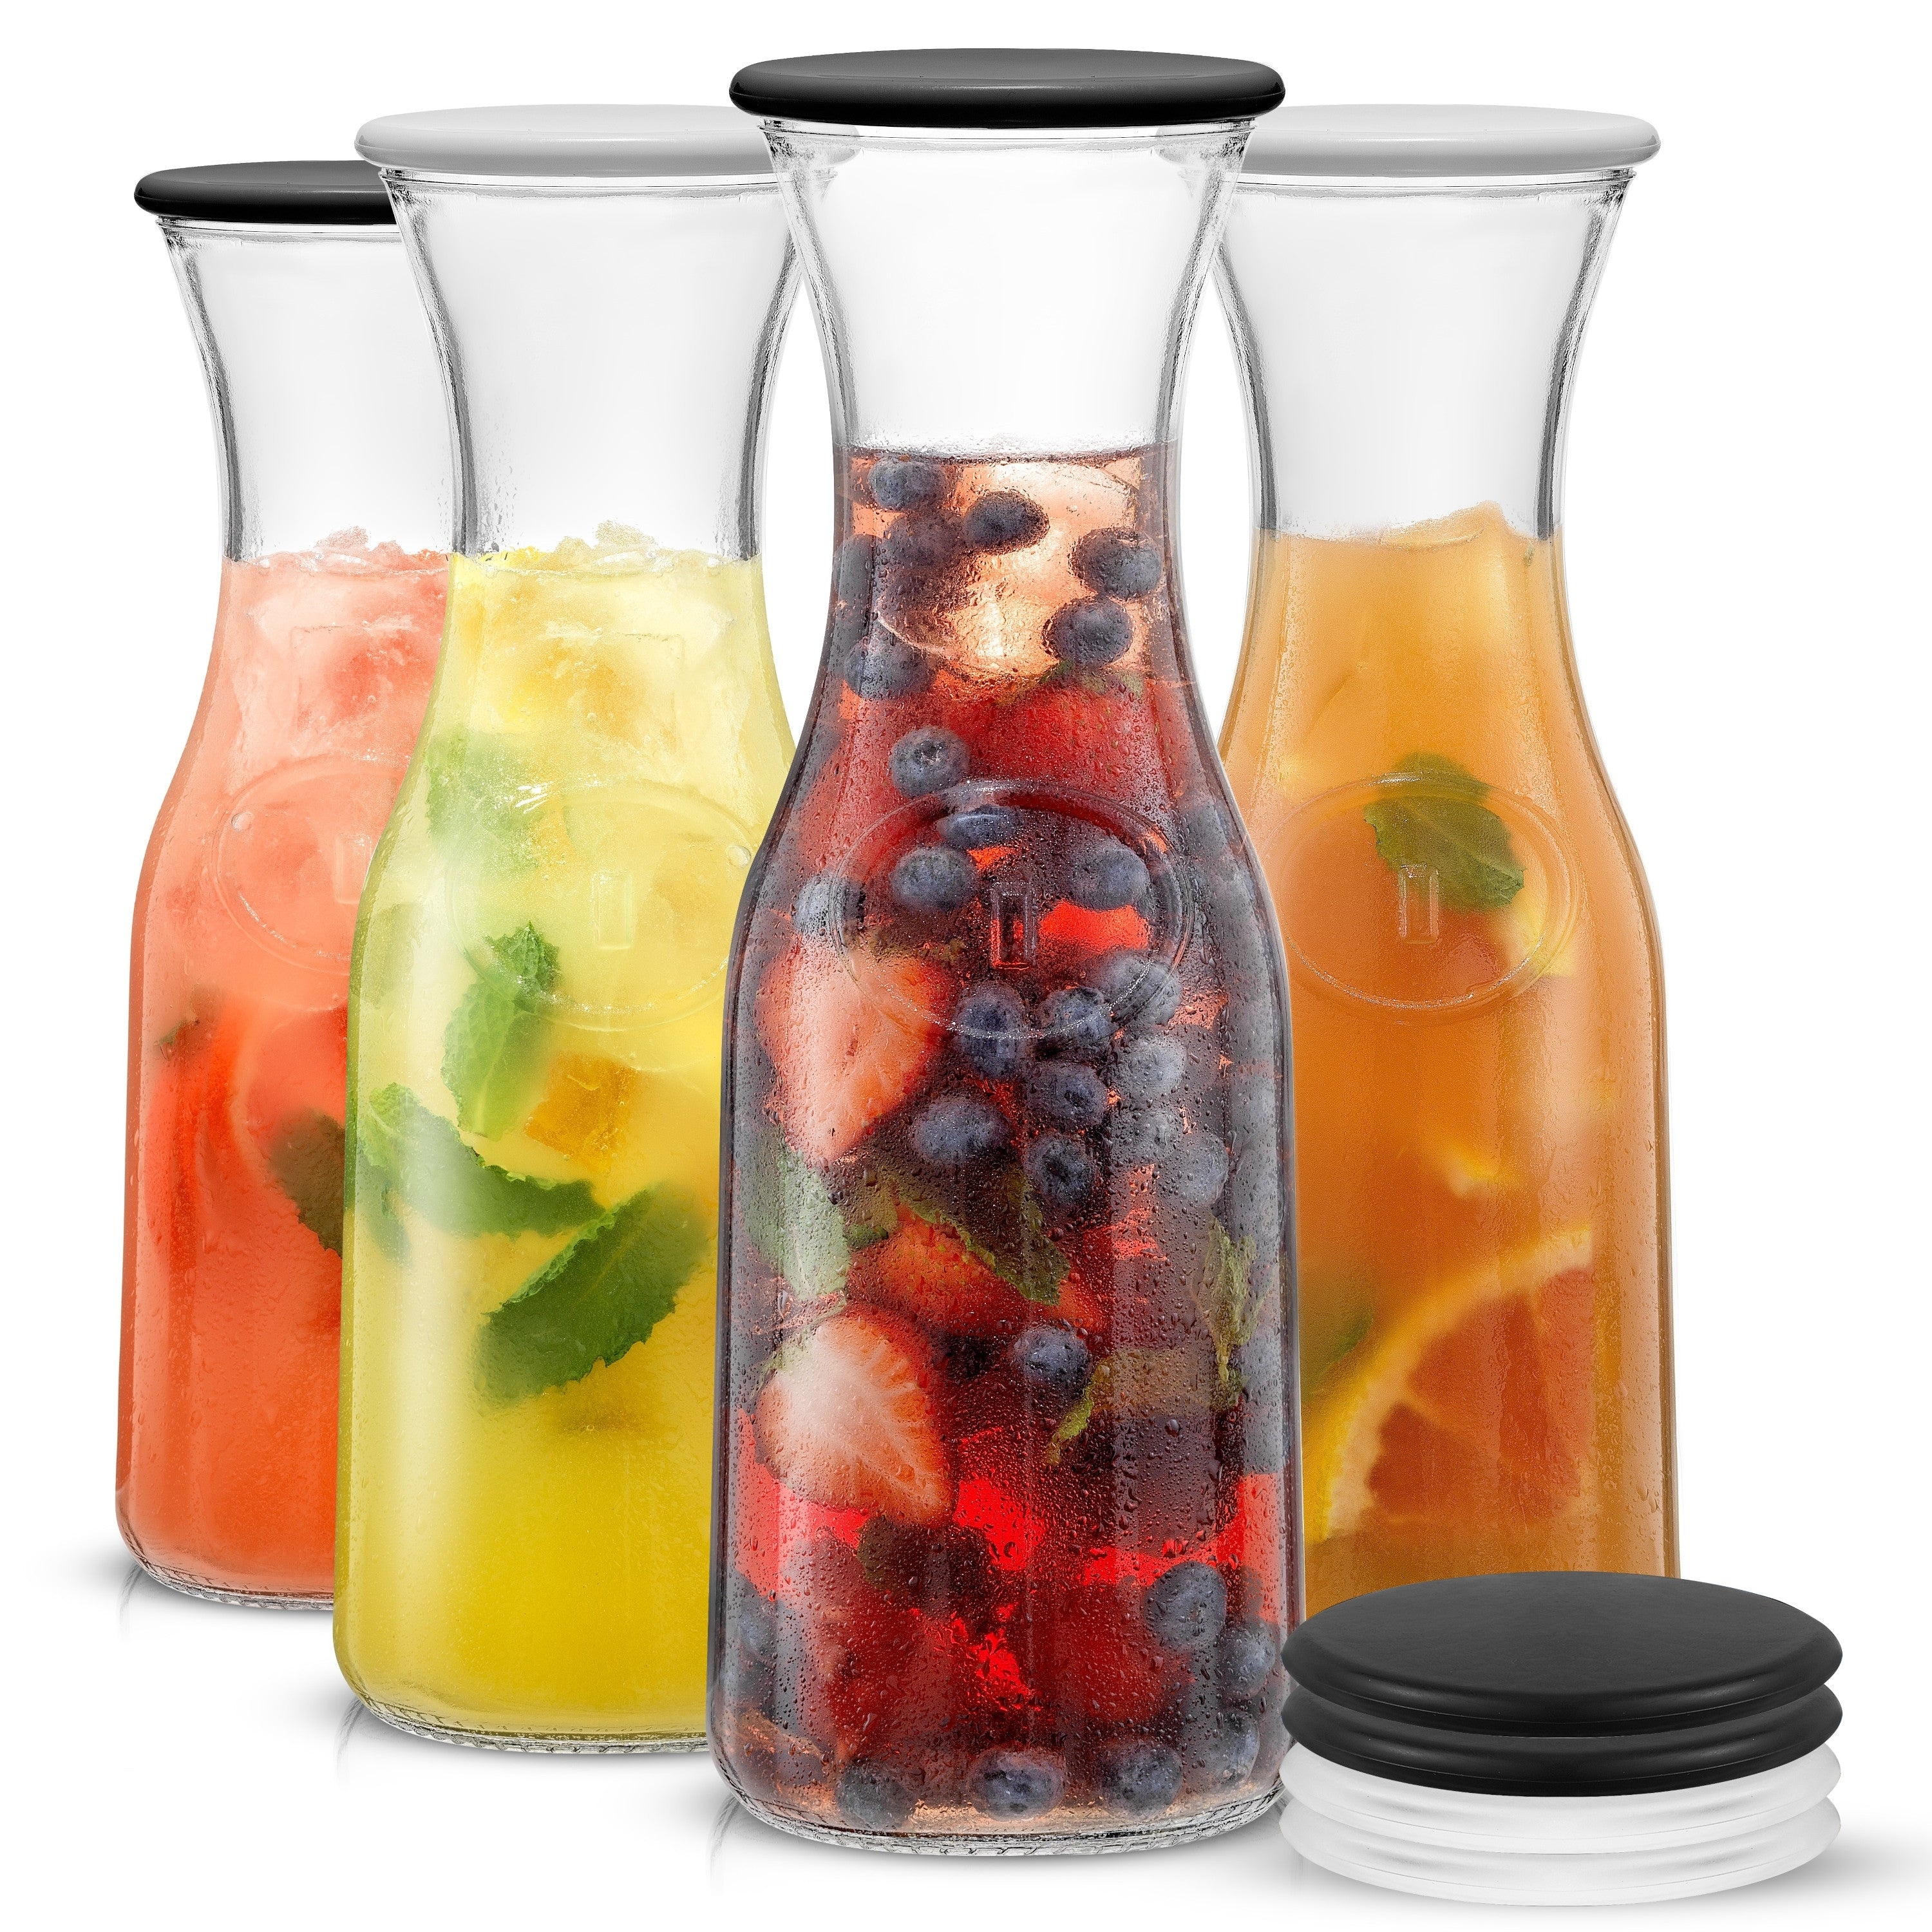 Glass Carafe With Lids For Mimosa Bar 1 Liter Set Of 4 Glass